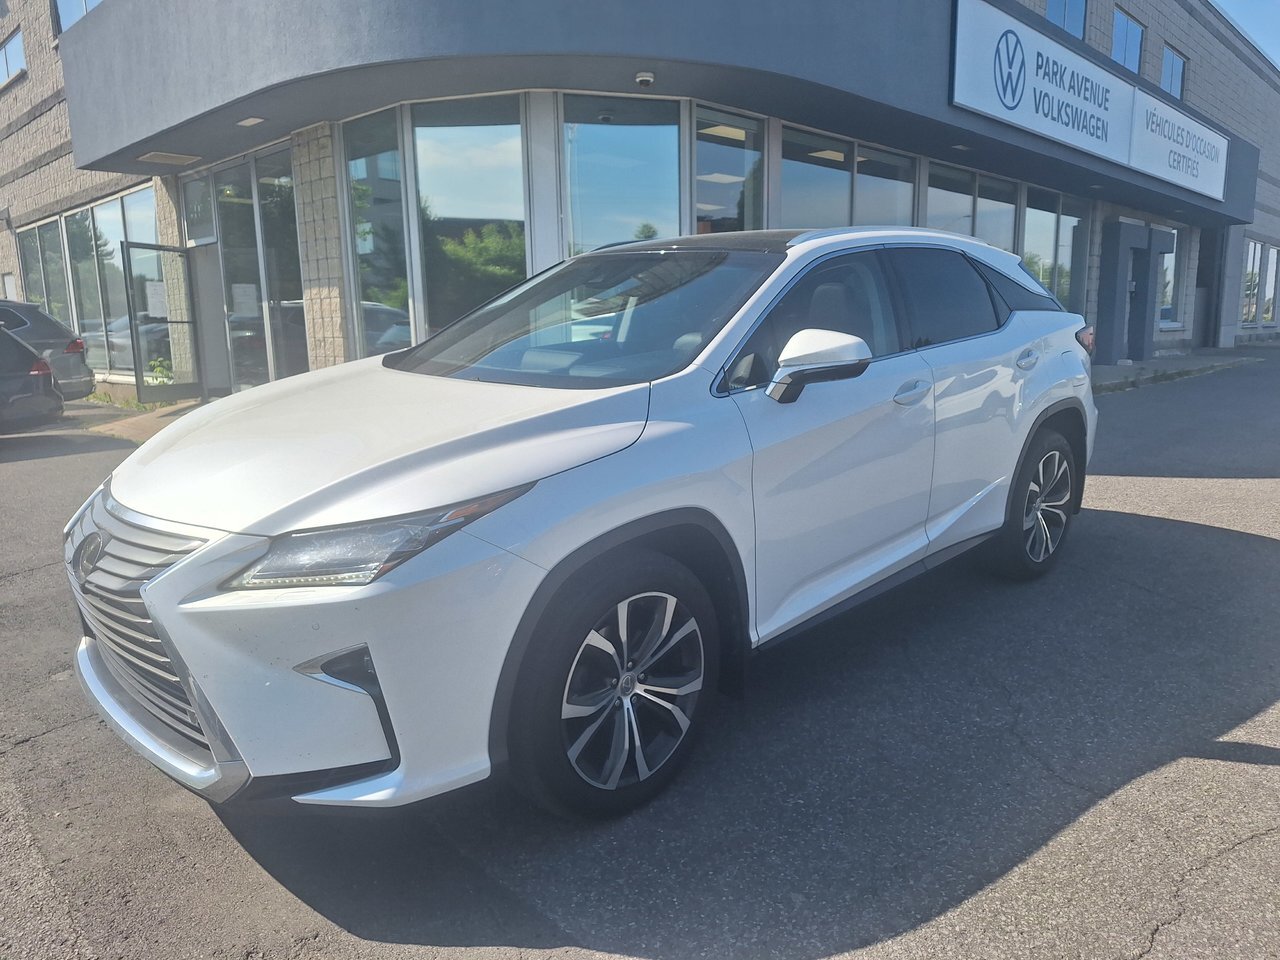 2016 Lexus RX 350 EXECUTIVE // MAGS 20 INCHES // MOONROOF // PRE